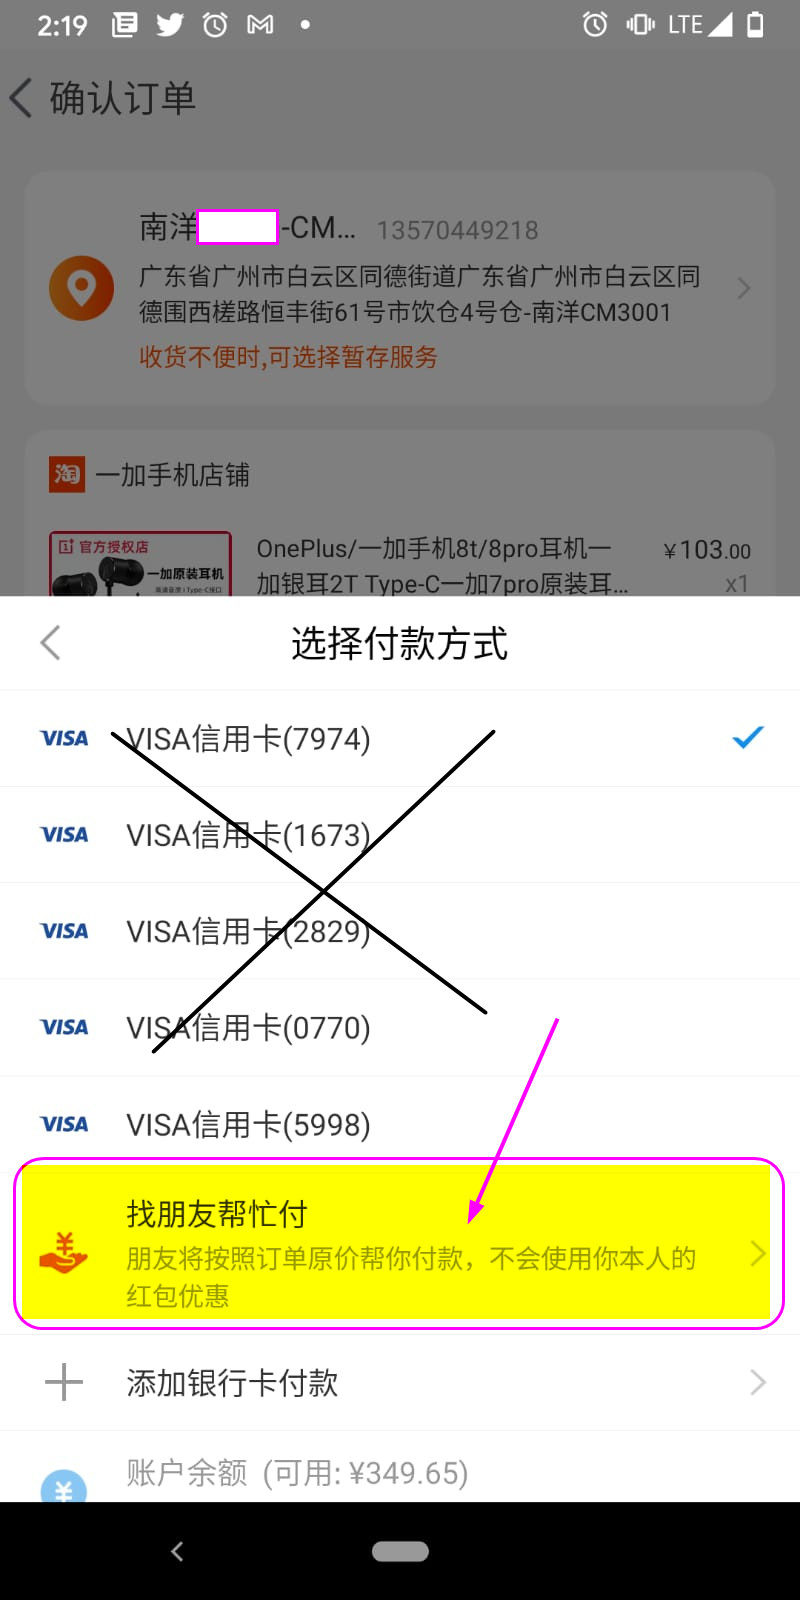 Taobao2sg  Taobao Alipay Mobile App Pay for me service